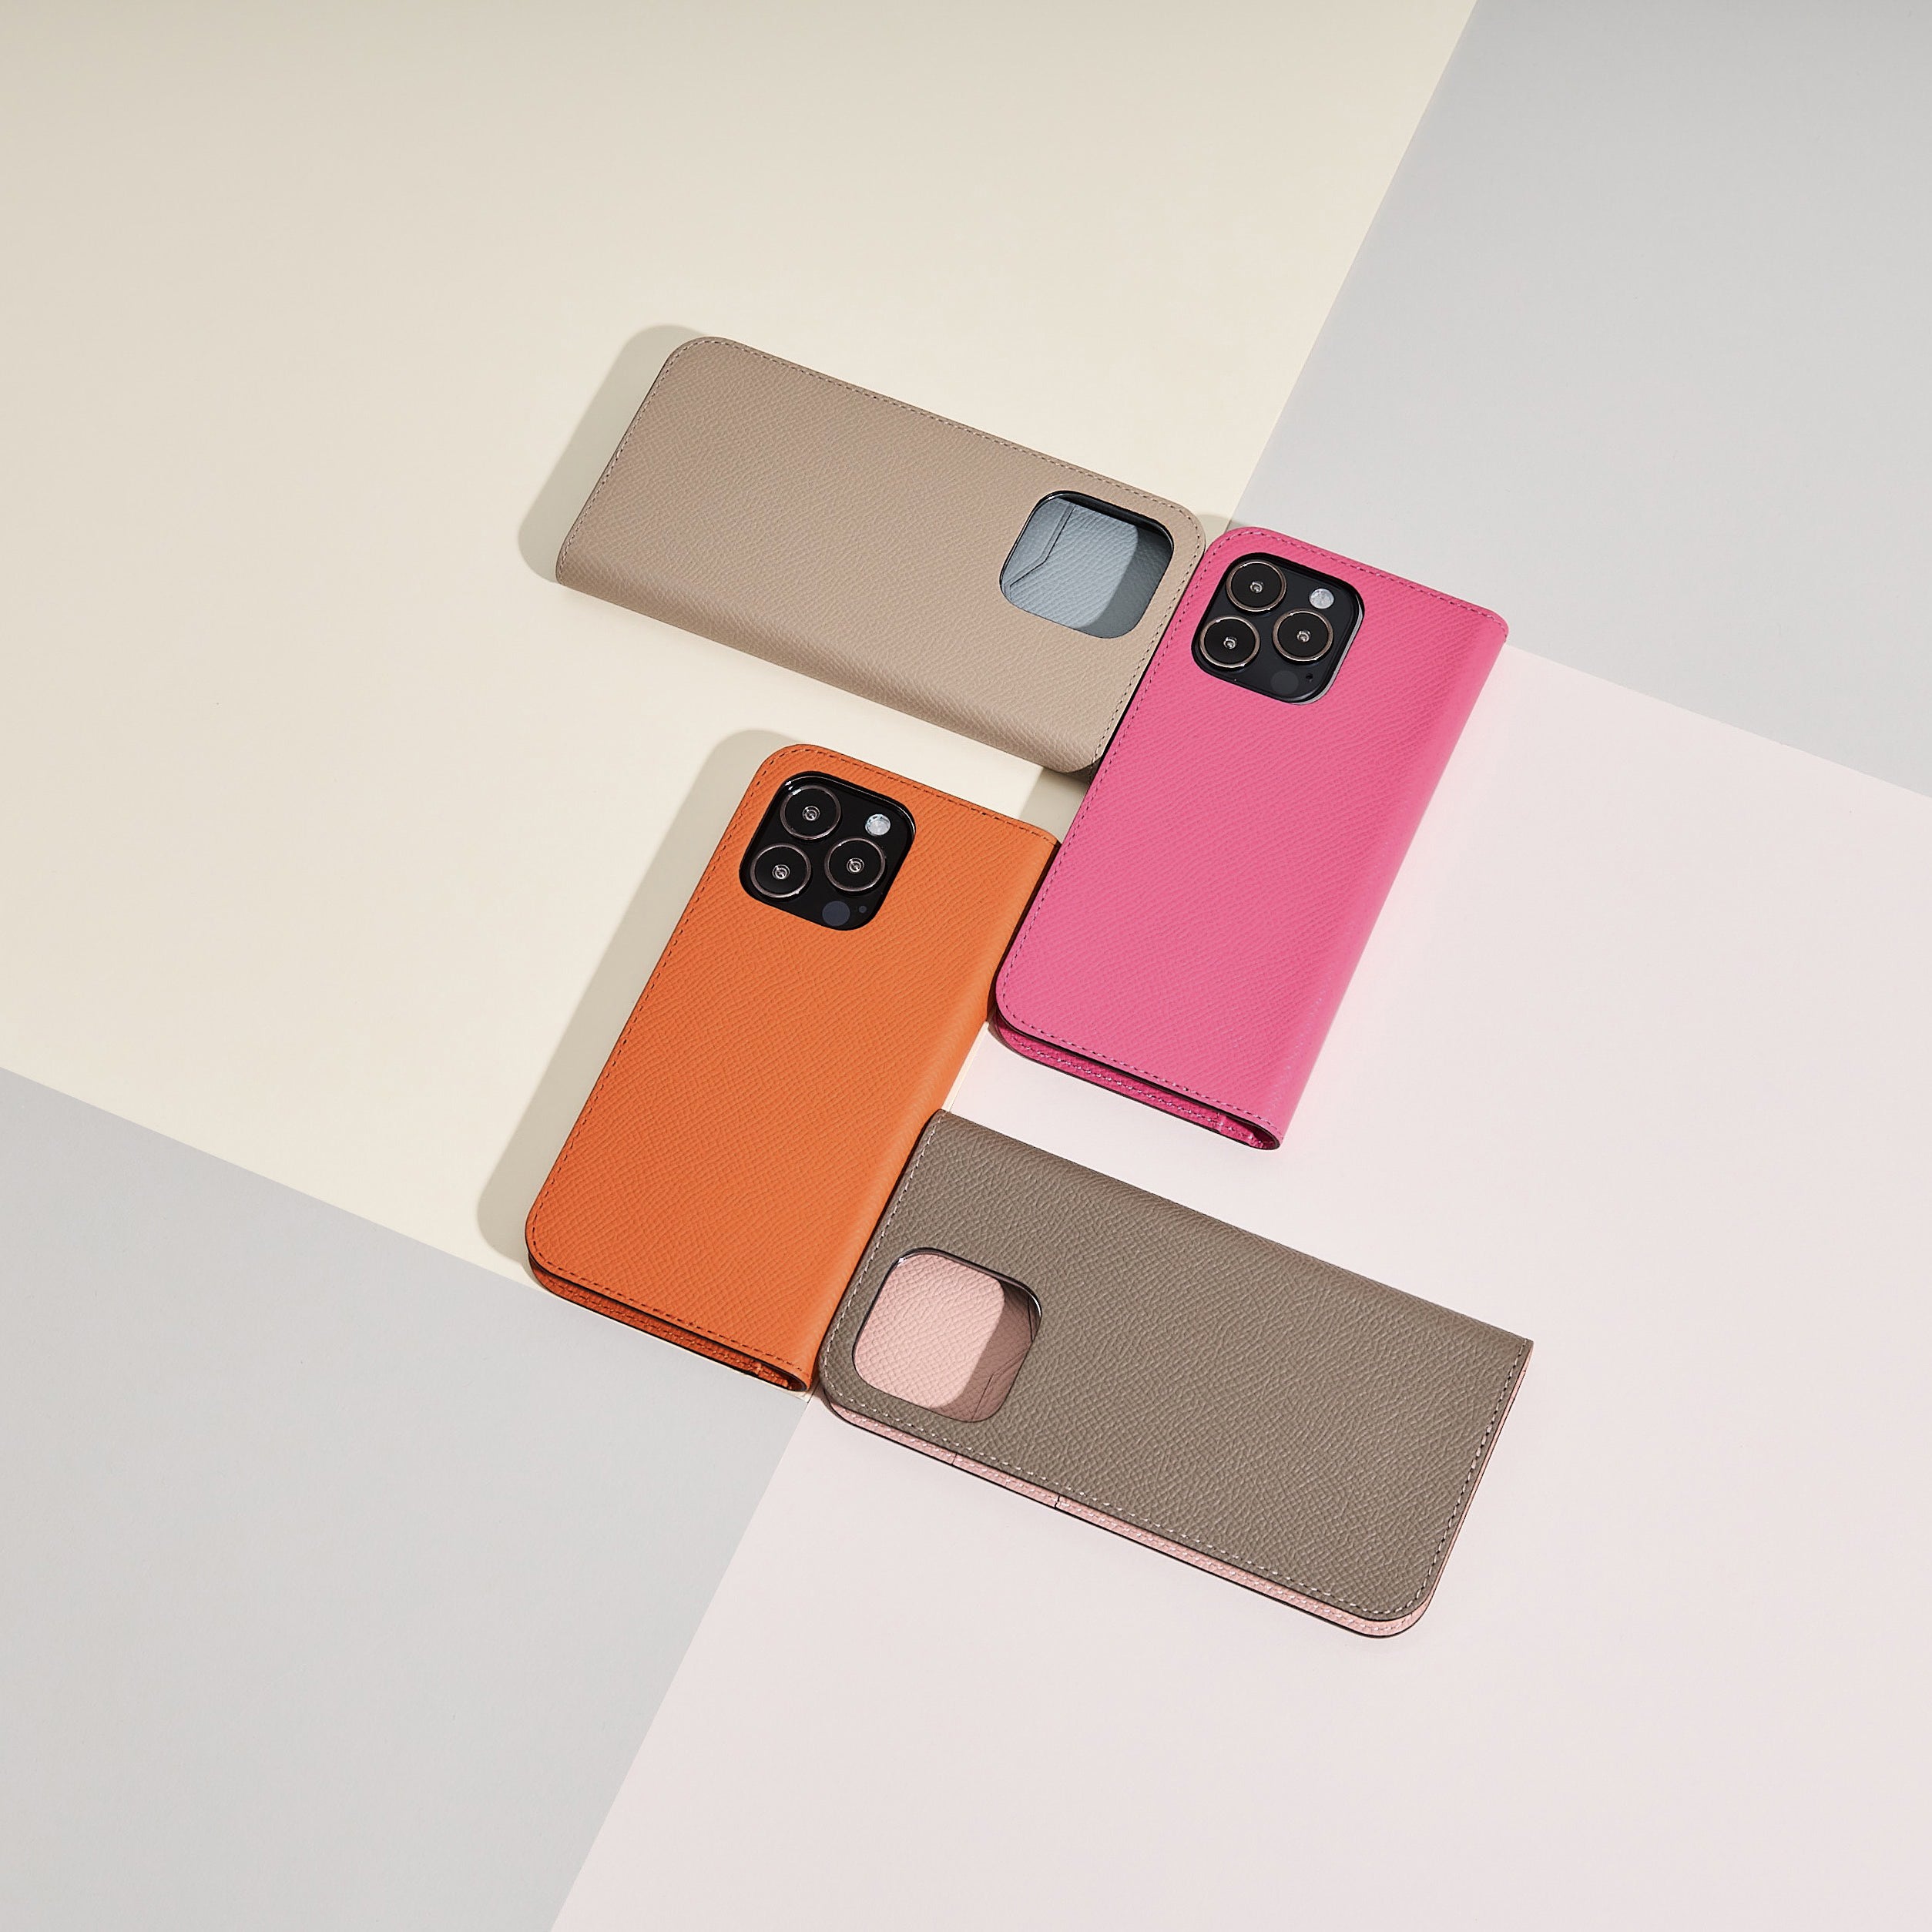 BONAVENTURA iPhone Diary Cases made of Noblessa leather in different elegant color combinations.